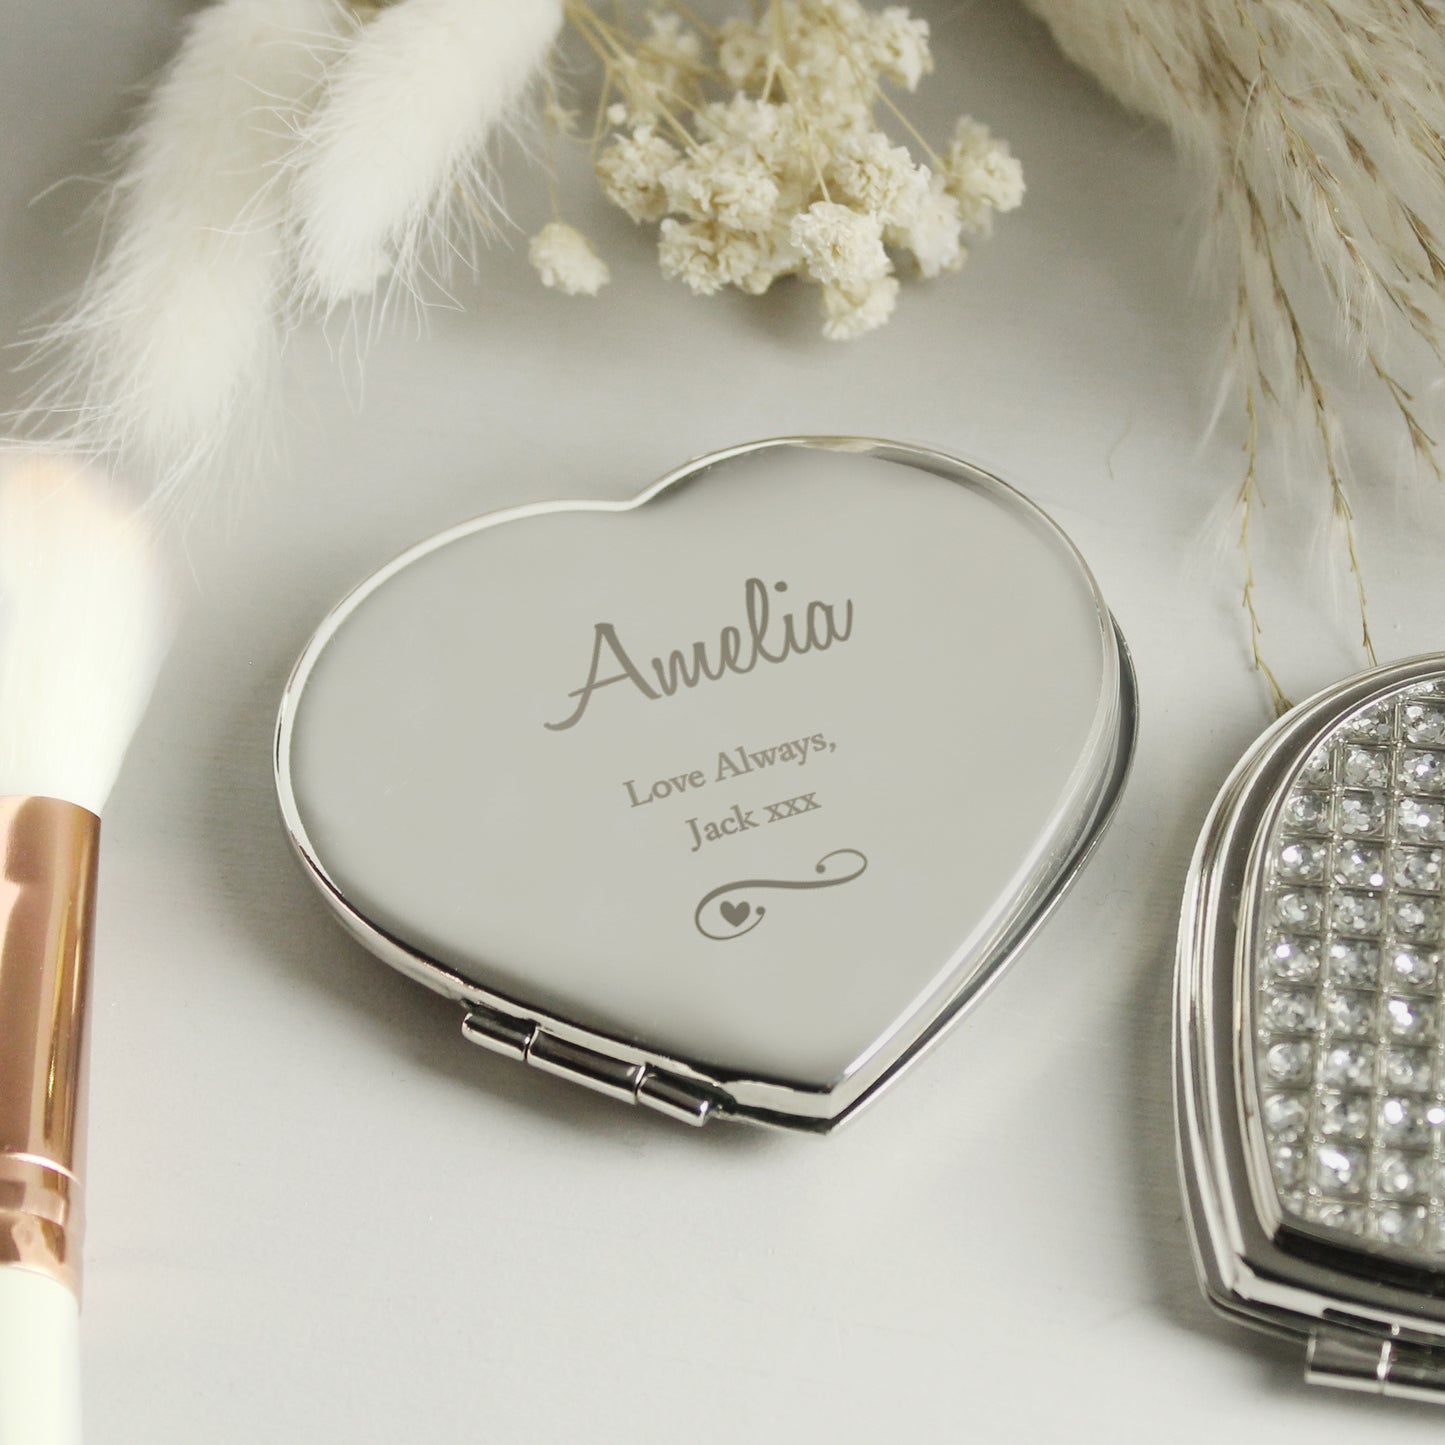 Personalised Swirls & Hearts Diamante Heart Compact Mirror - Personalise It!